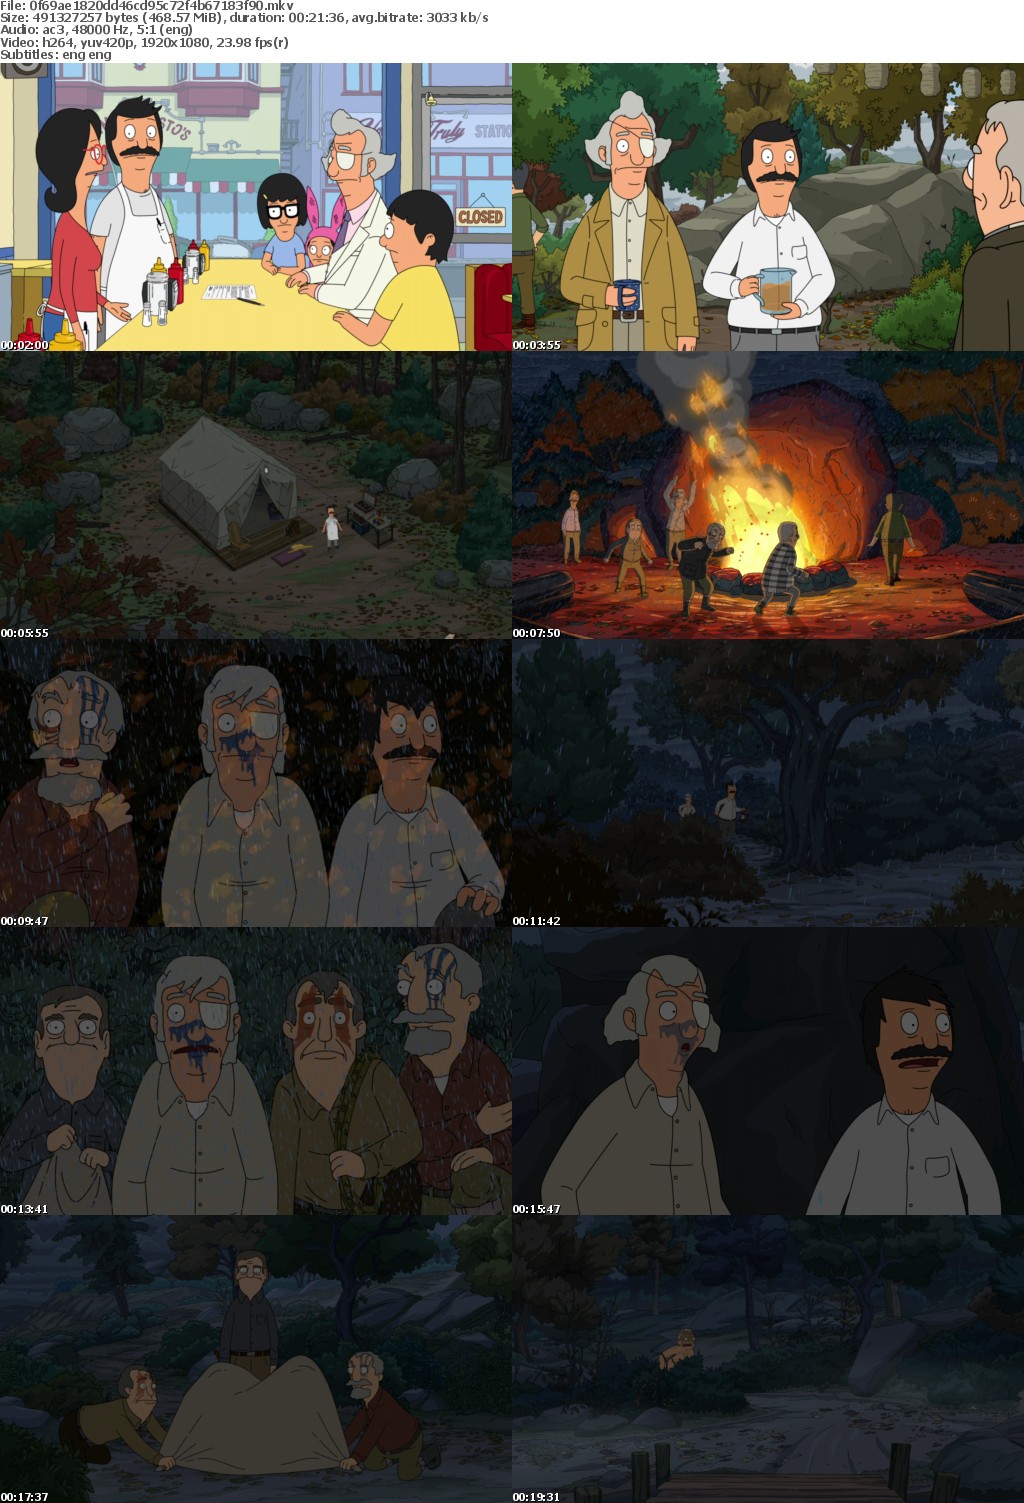 Bobs Burgers S14E06 Escape From Which Island 1080p HULU WEB-DL DDP5 1 H 264-NTb